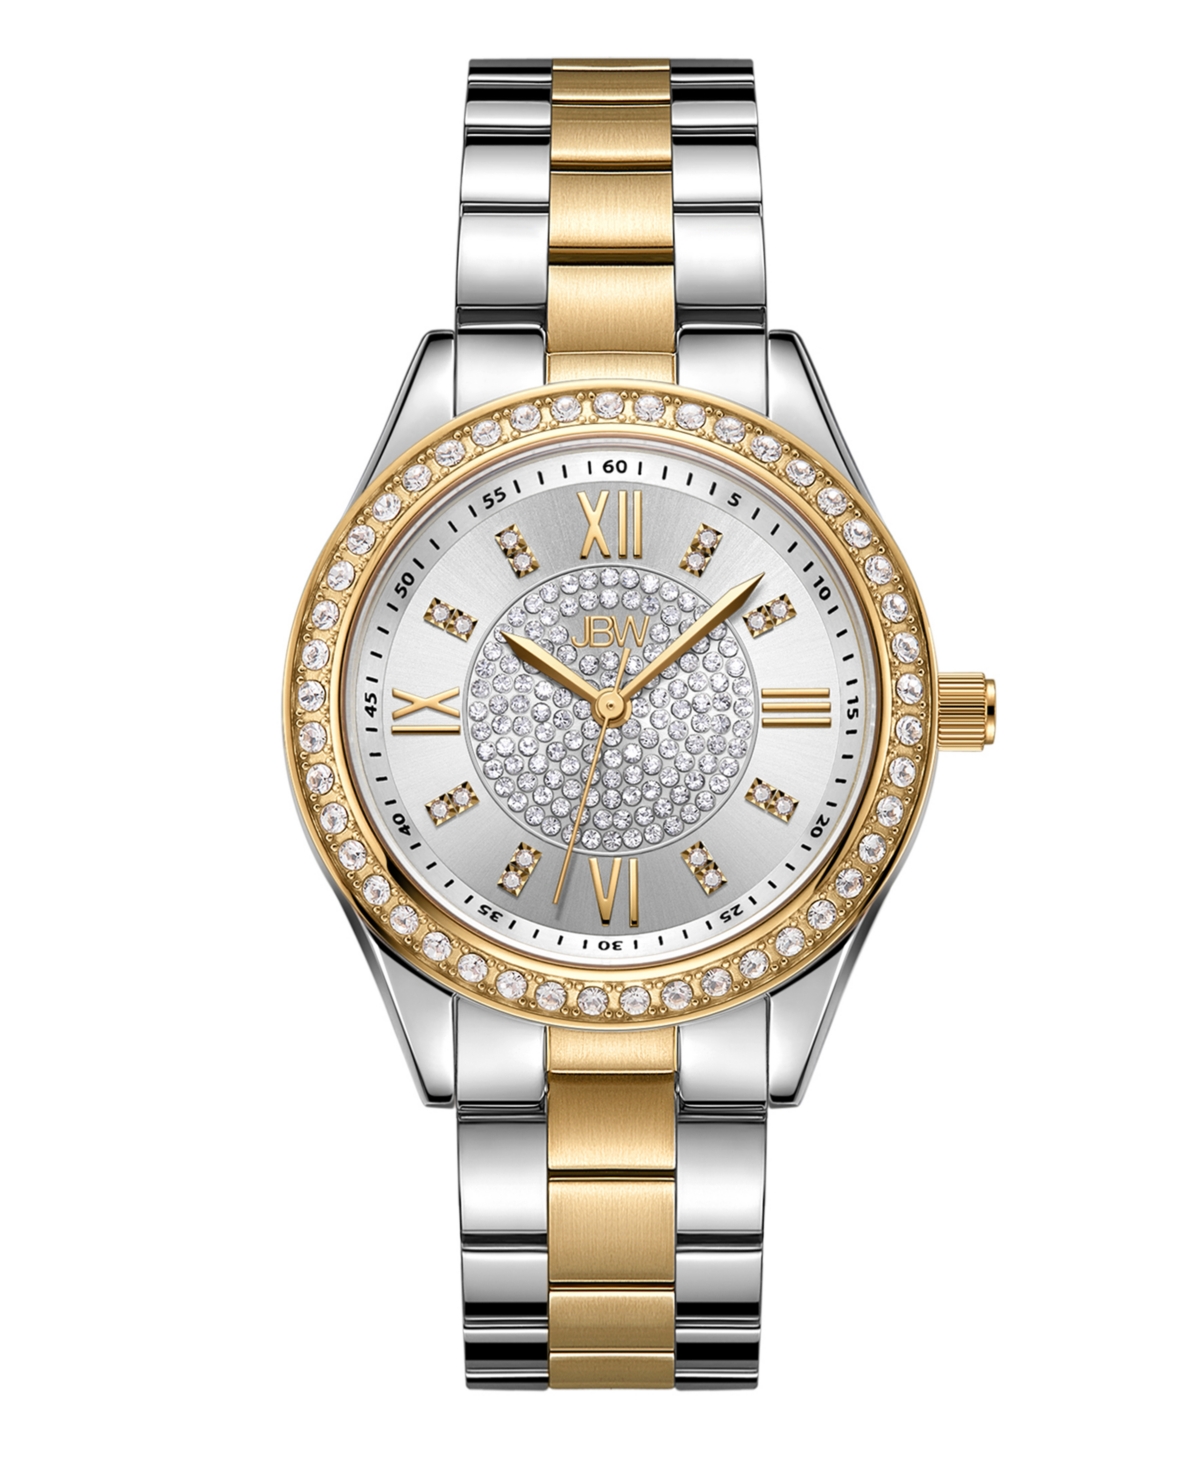 Women's Mondrian Two-Tone 18k Gold-plated Stainless Steel Watch, 34mm - Stainless Steel